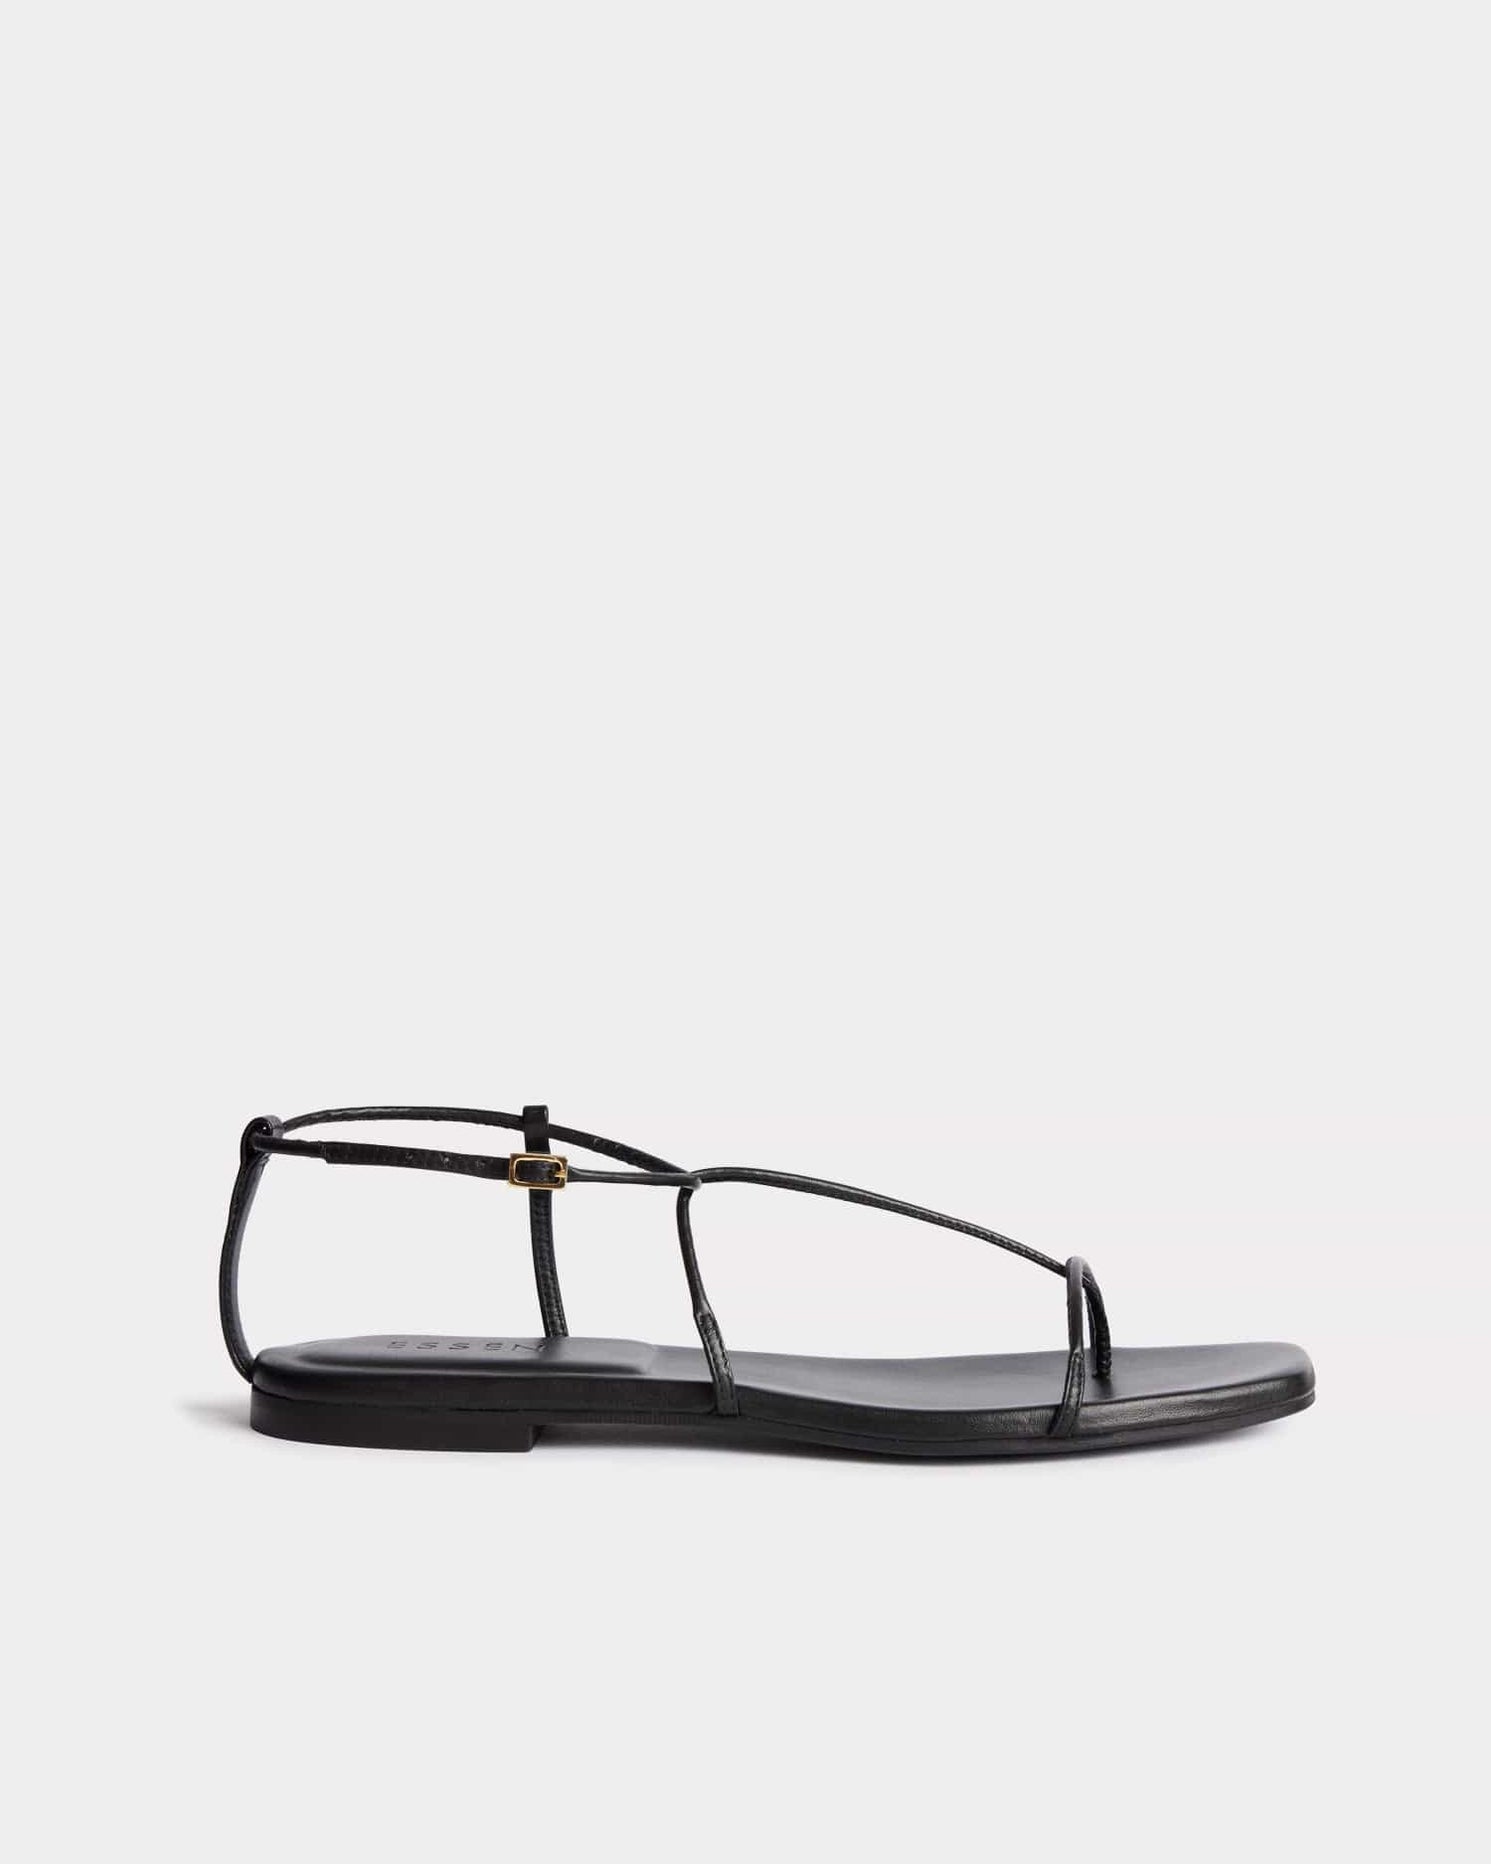 The Evening Sandal | Black leather sandals for Women– ESSĒN